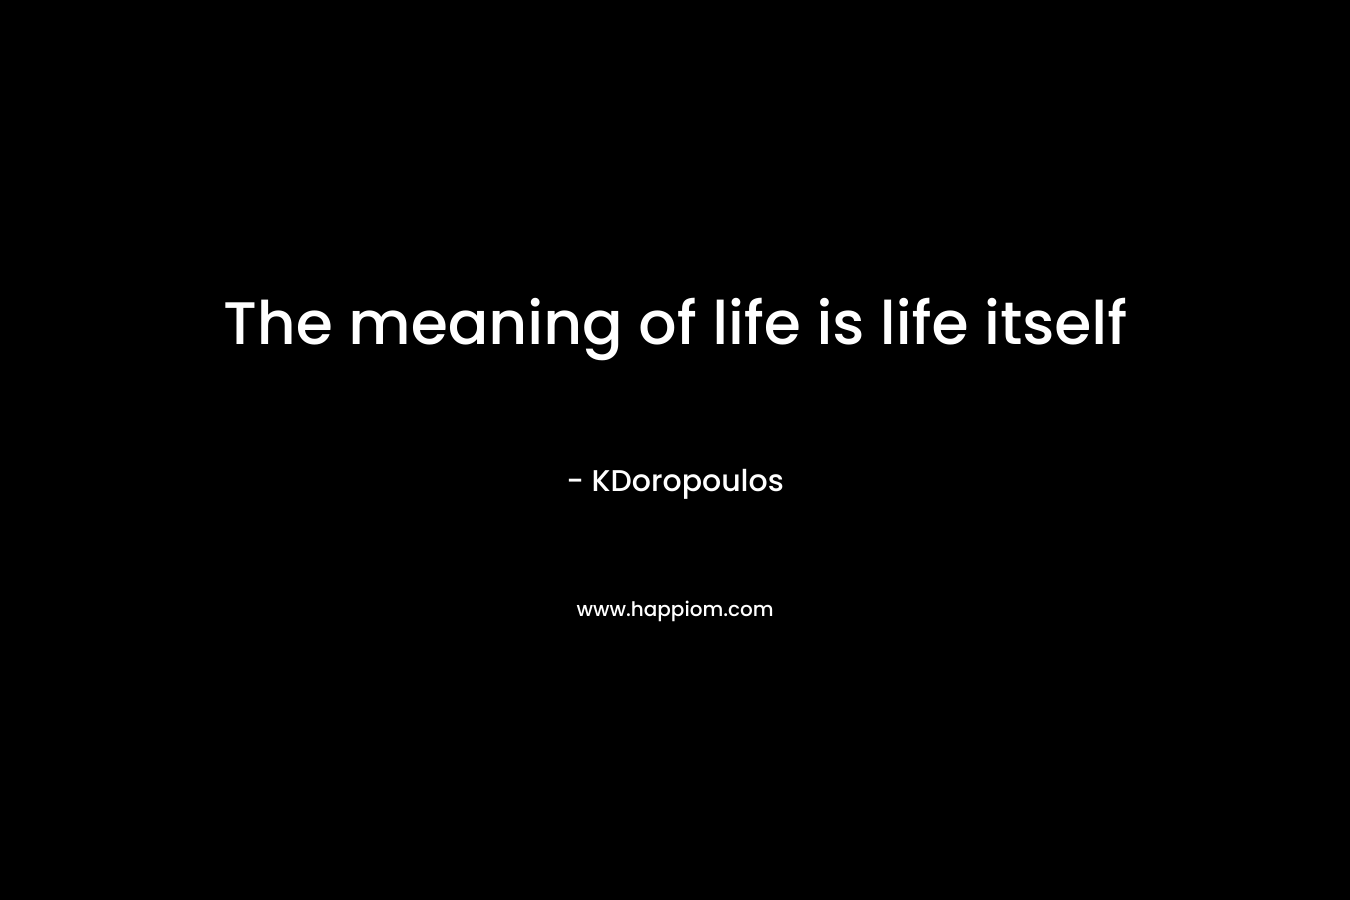 The meaning of life is life itself